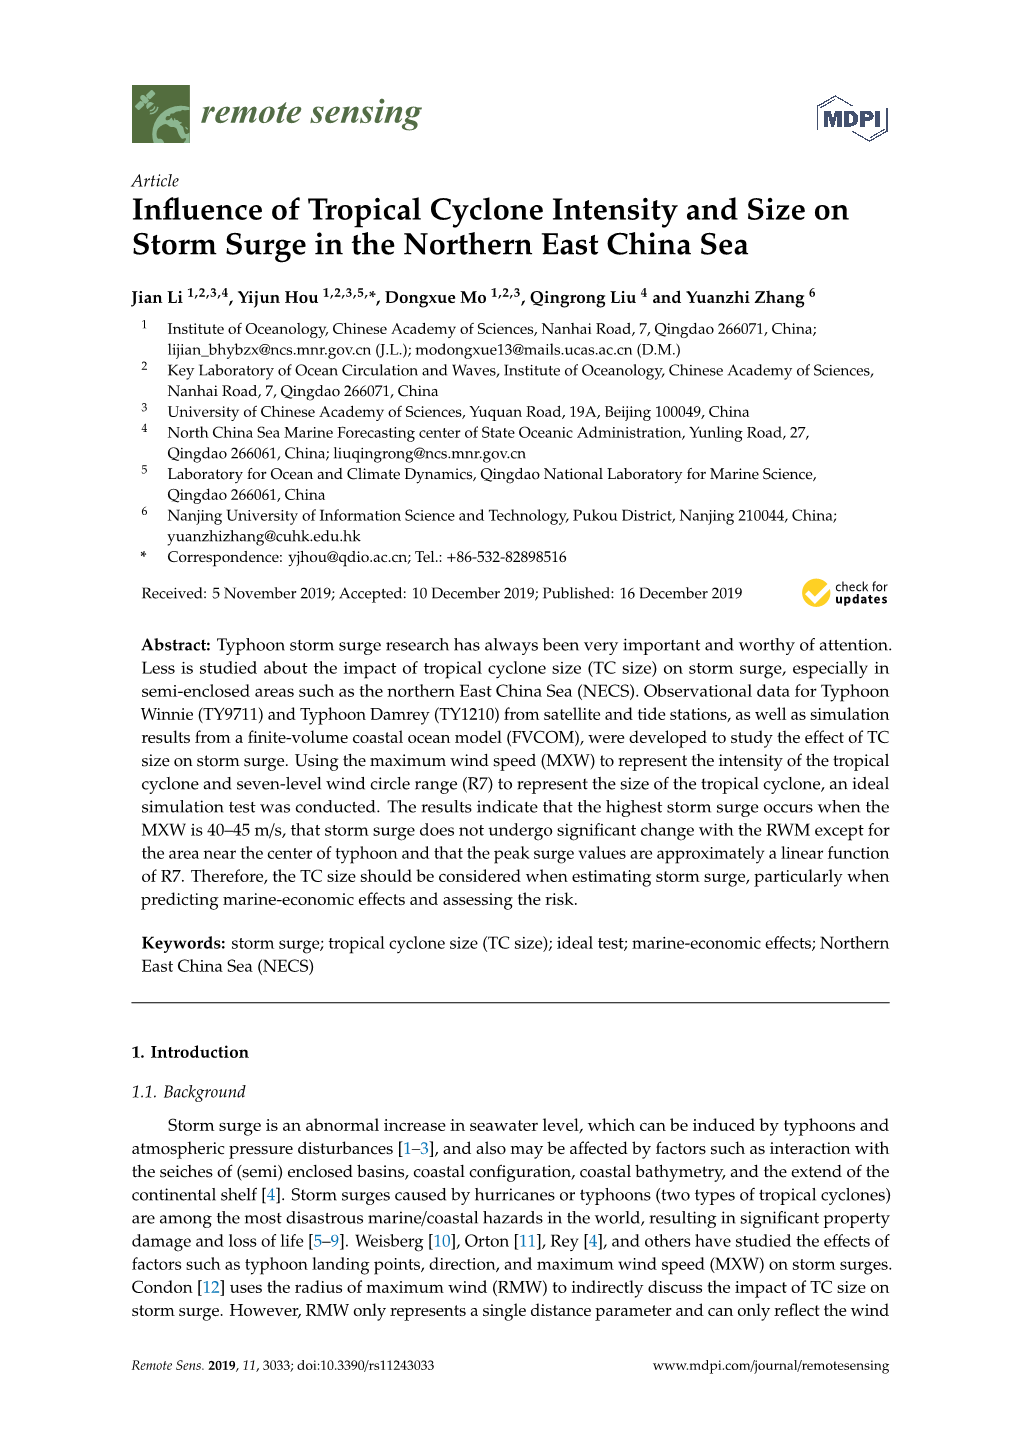 Influence of Tropical Cyclone Intensity and Size on Storm Surge in the Northern East China